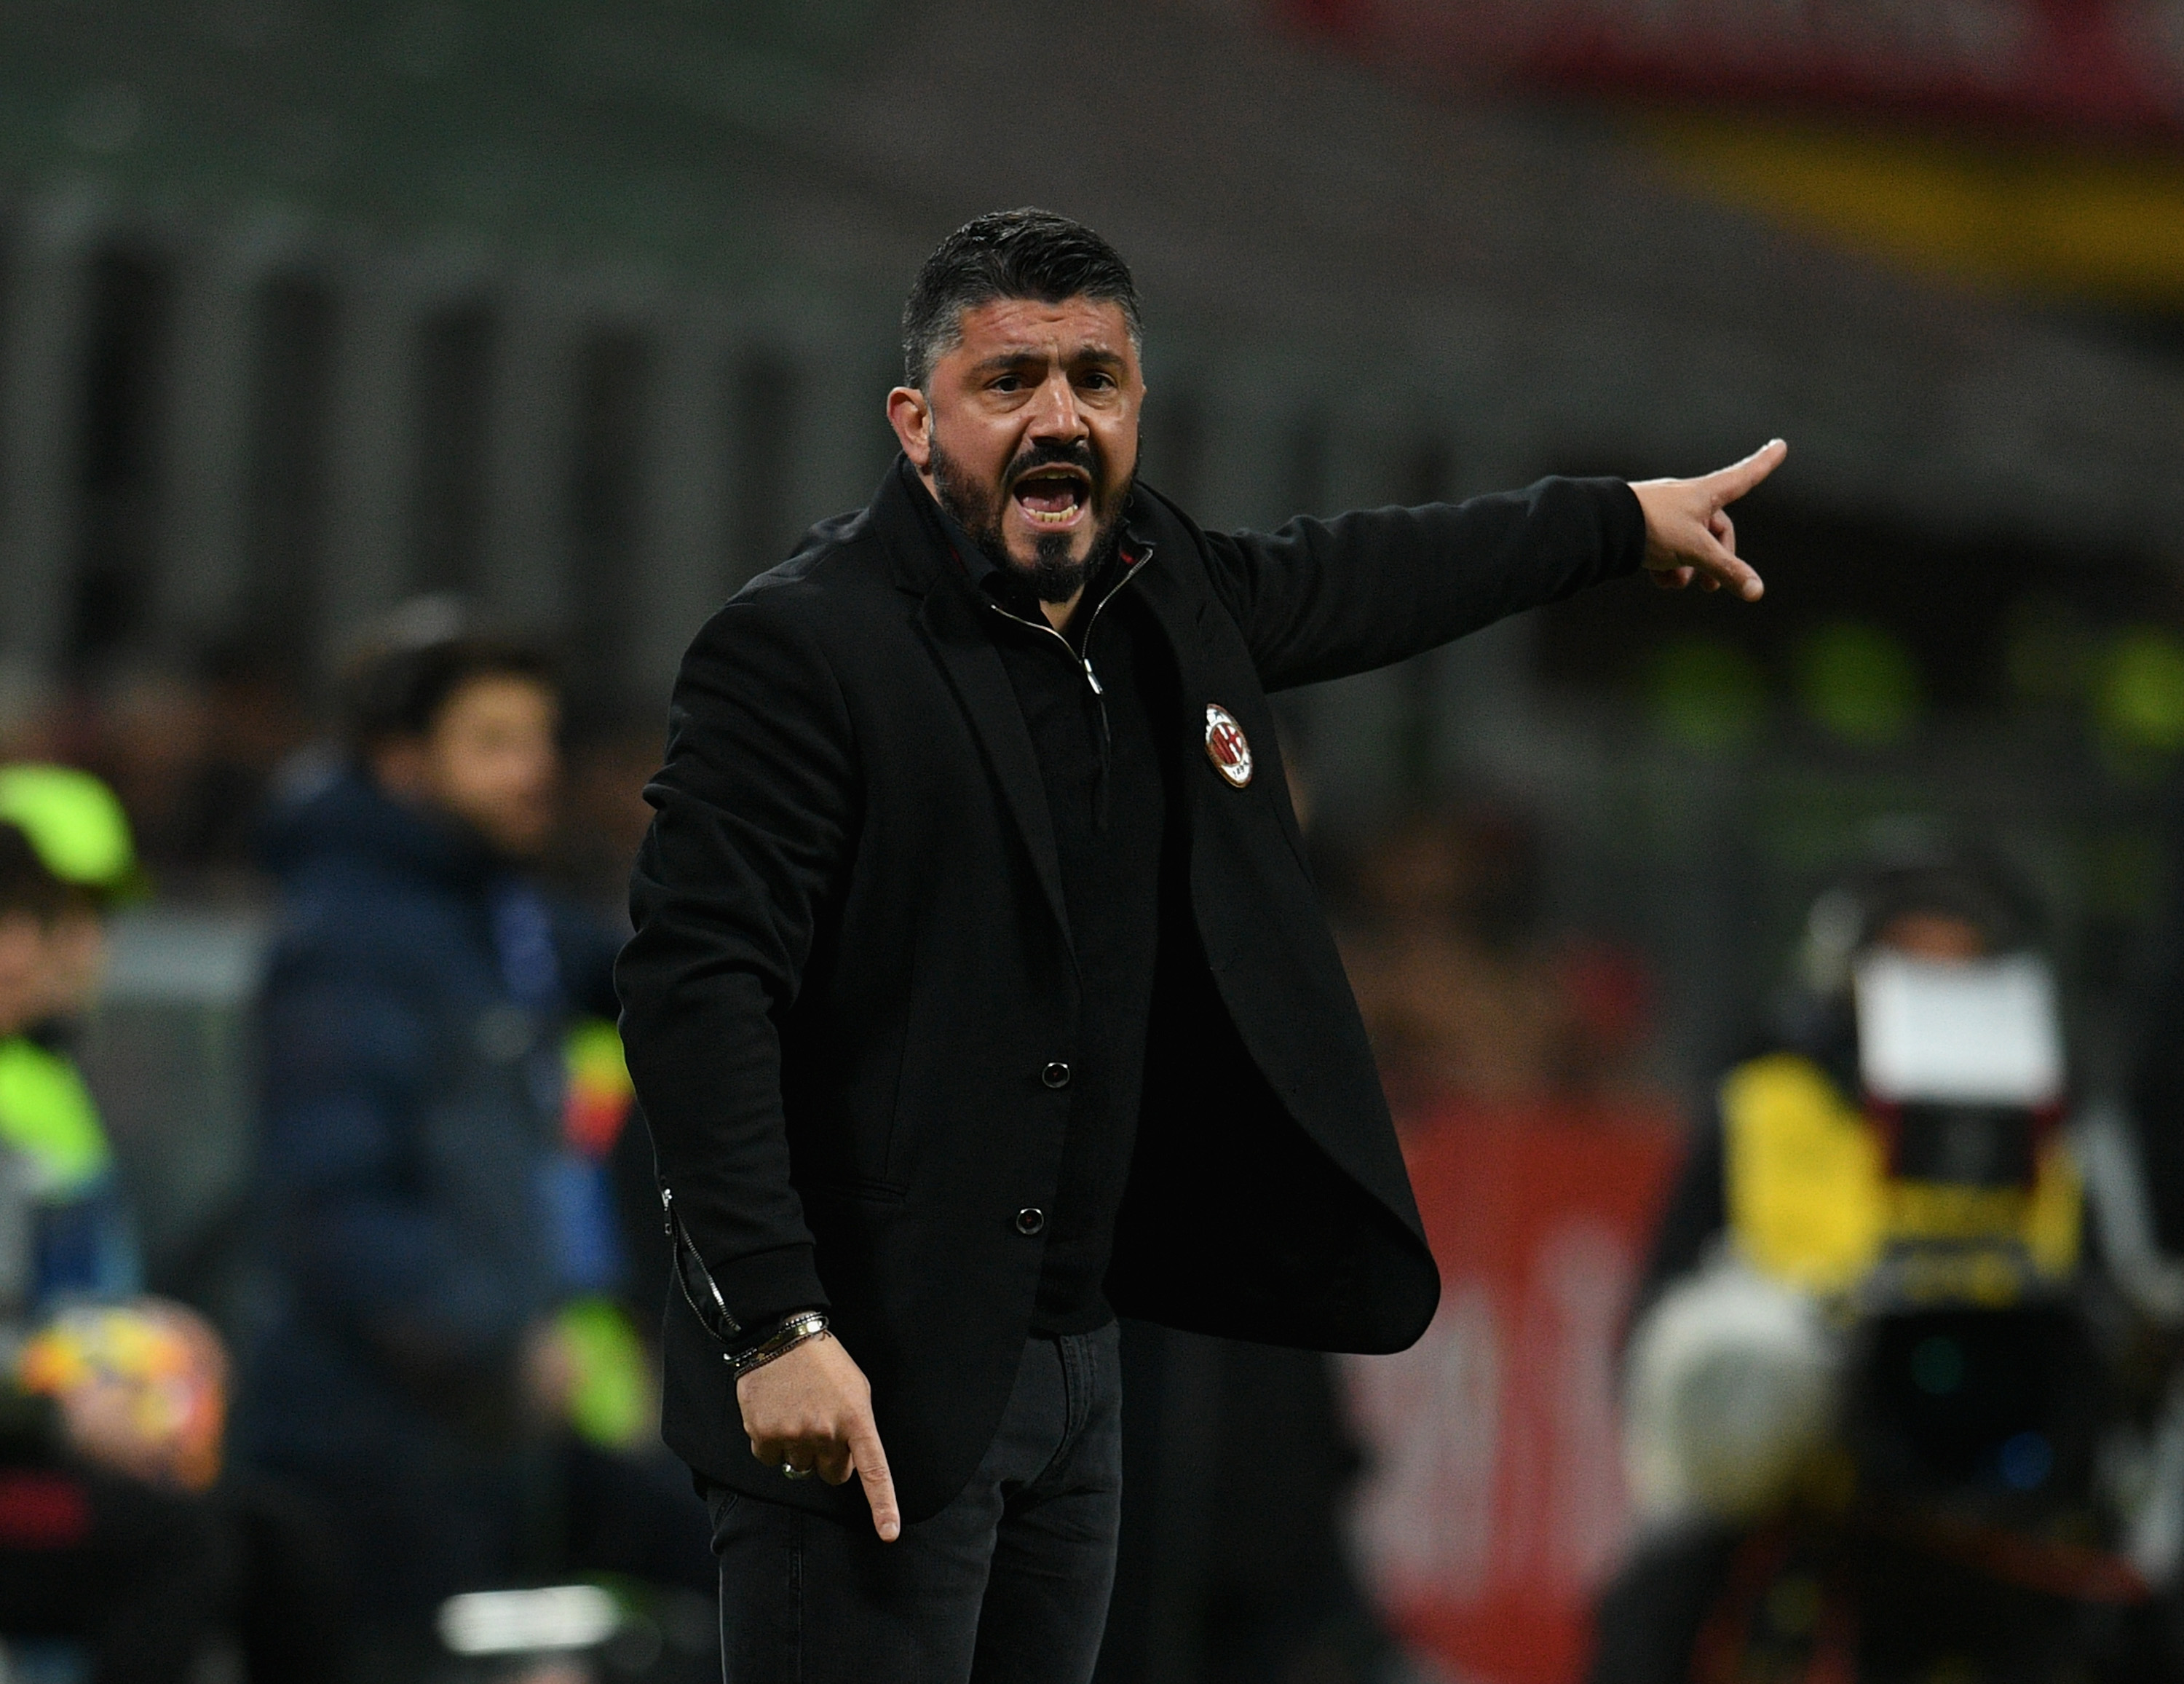 MILAN, ITALY - FEBRUARY 18:  Head coach AC Milan Gennaro Gattuso reacts during the serie A match between AC Milan and UC Sampdoria at Stadio Giuseppe Meazza on February 18, 2018 in Milan, Italy.  (Photo by Claudio Villa/Getty Images)